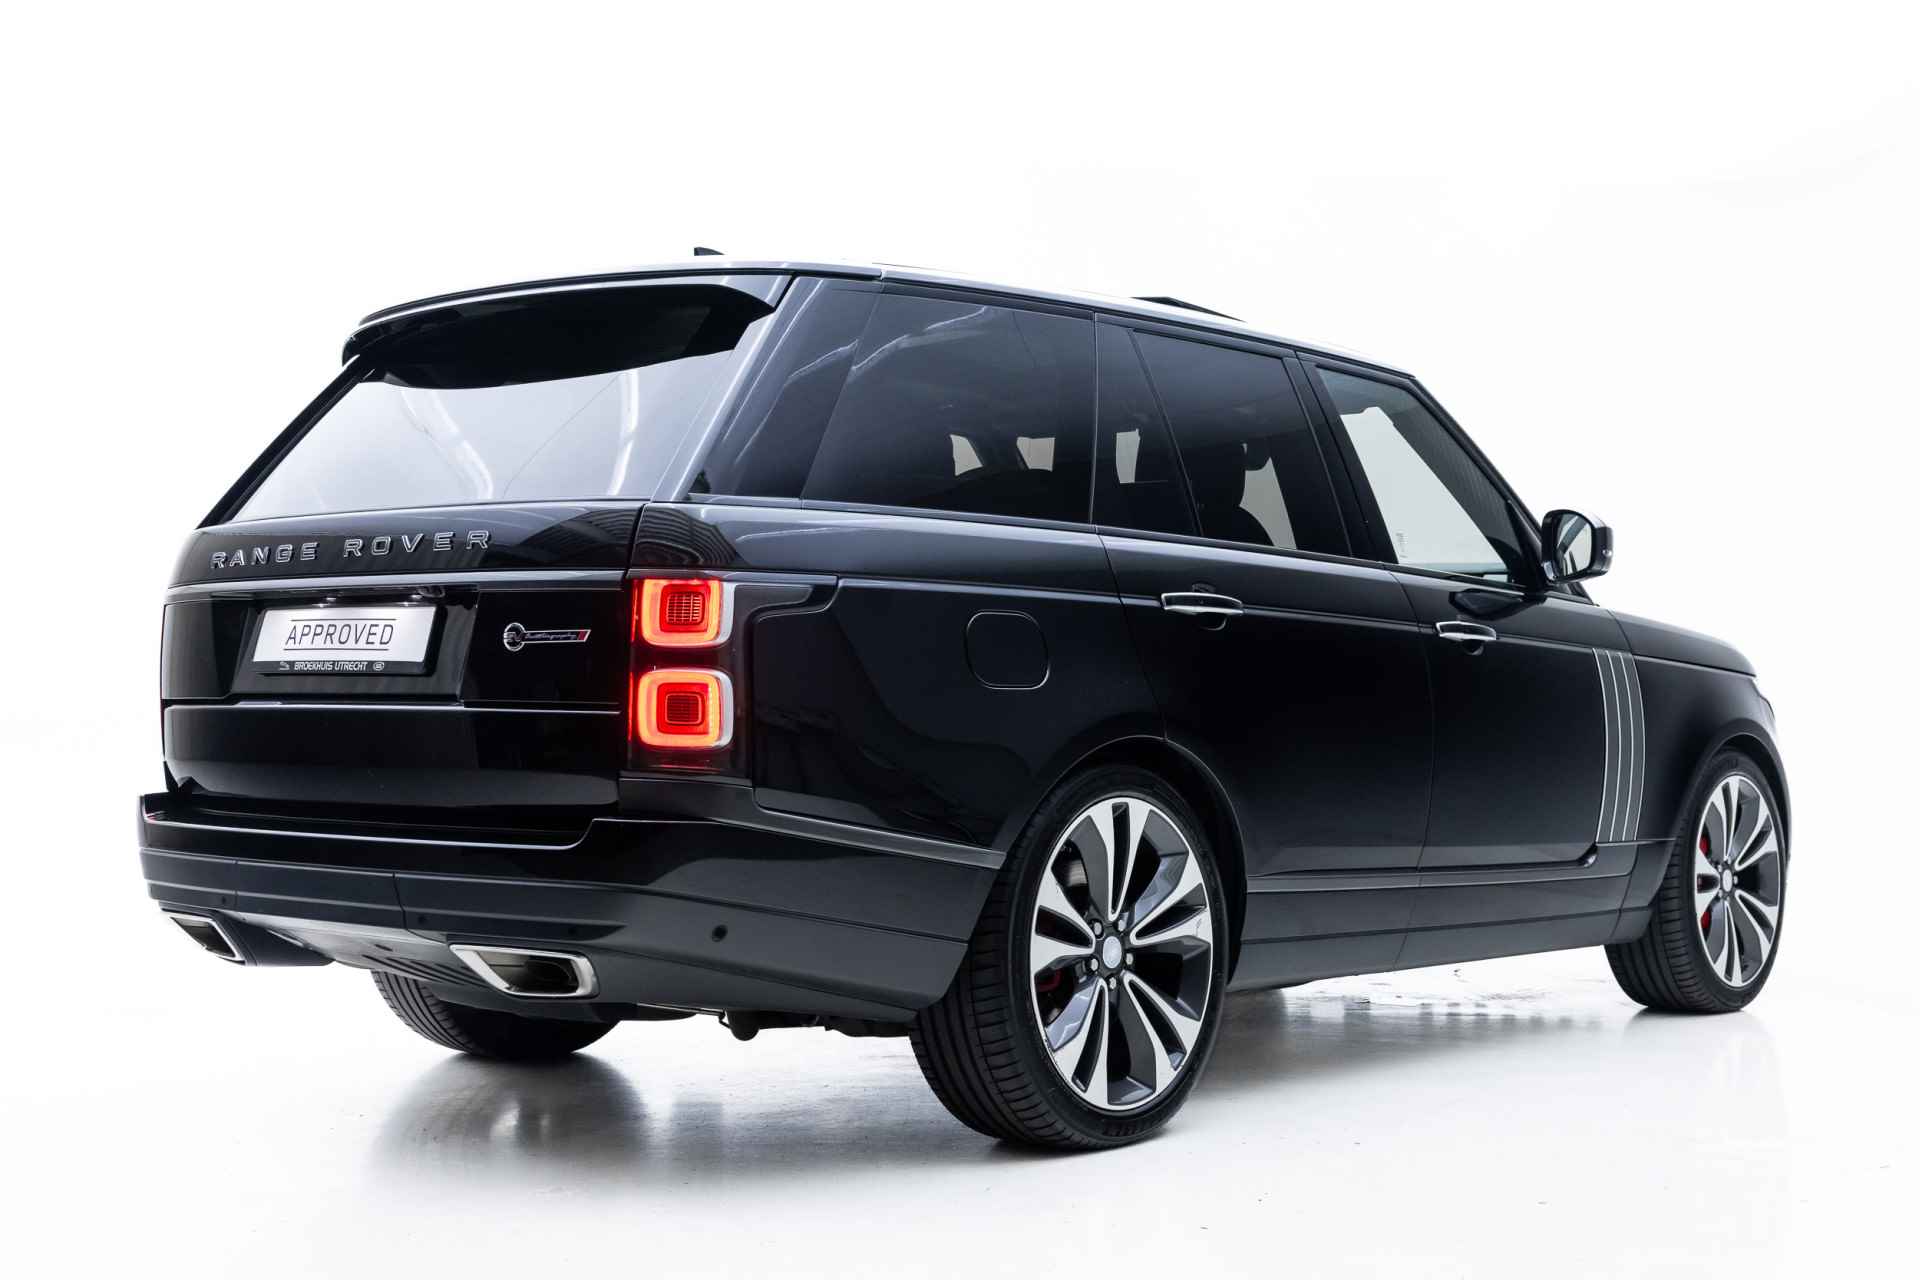 Land Rover Range Rover P565 SVAutobiography Dynamic Black | Hot Stone Massage | Carbon interieur afwerking | Executive Rear Seating | - 6/42